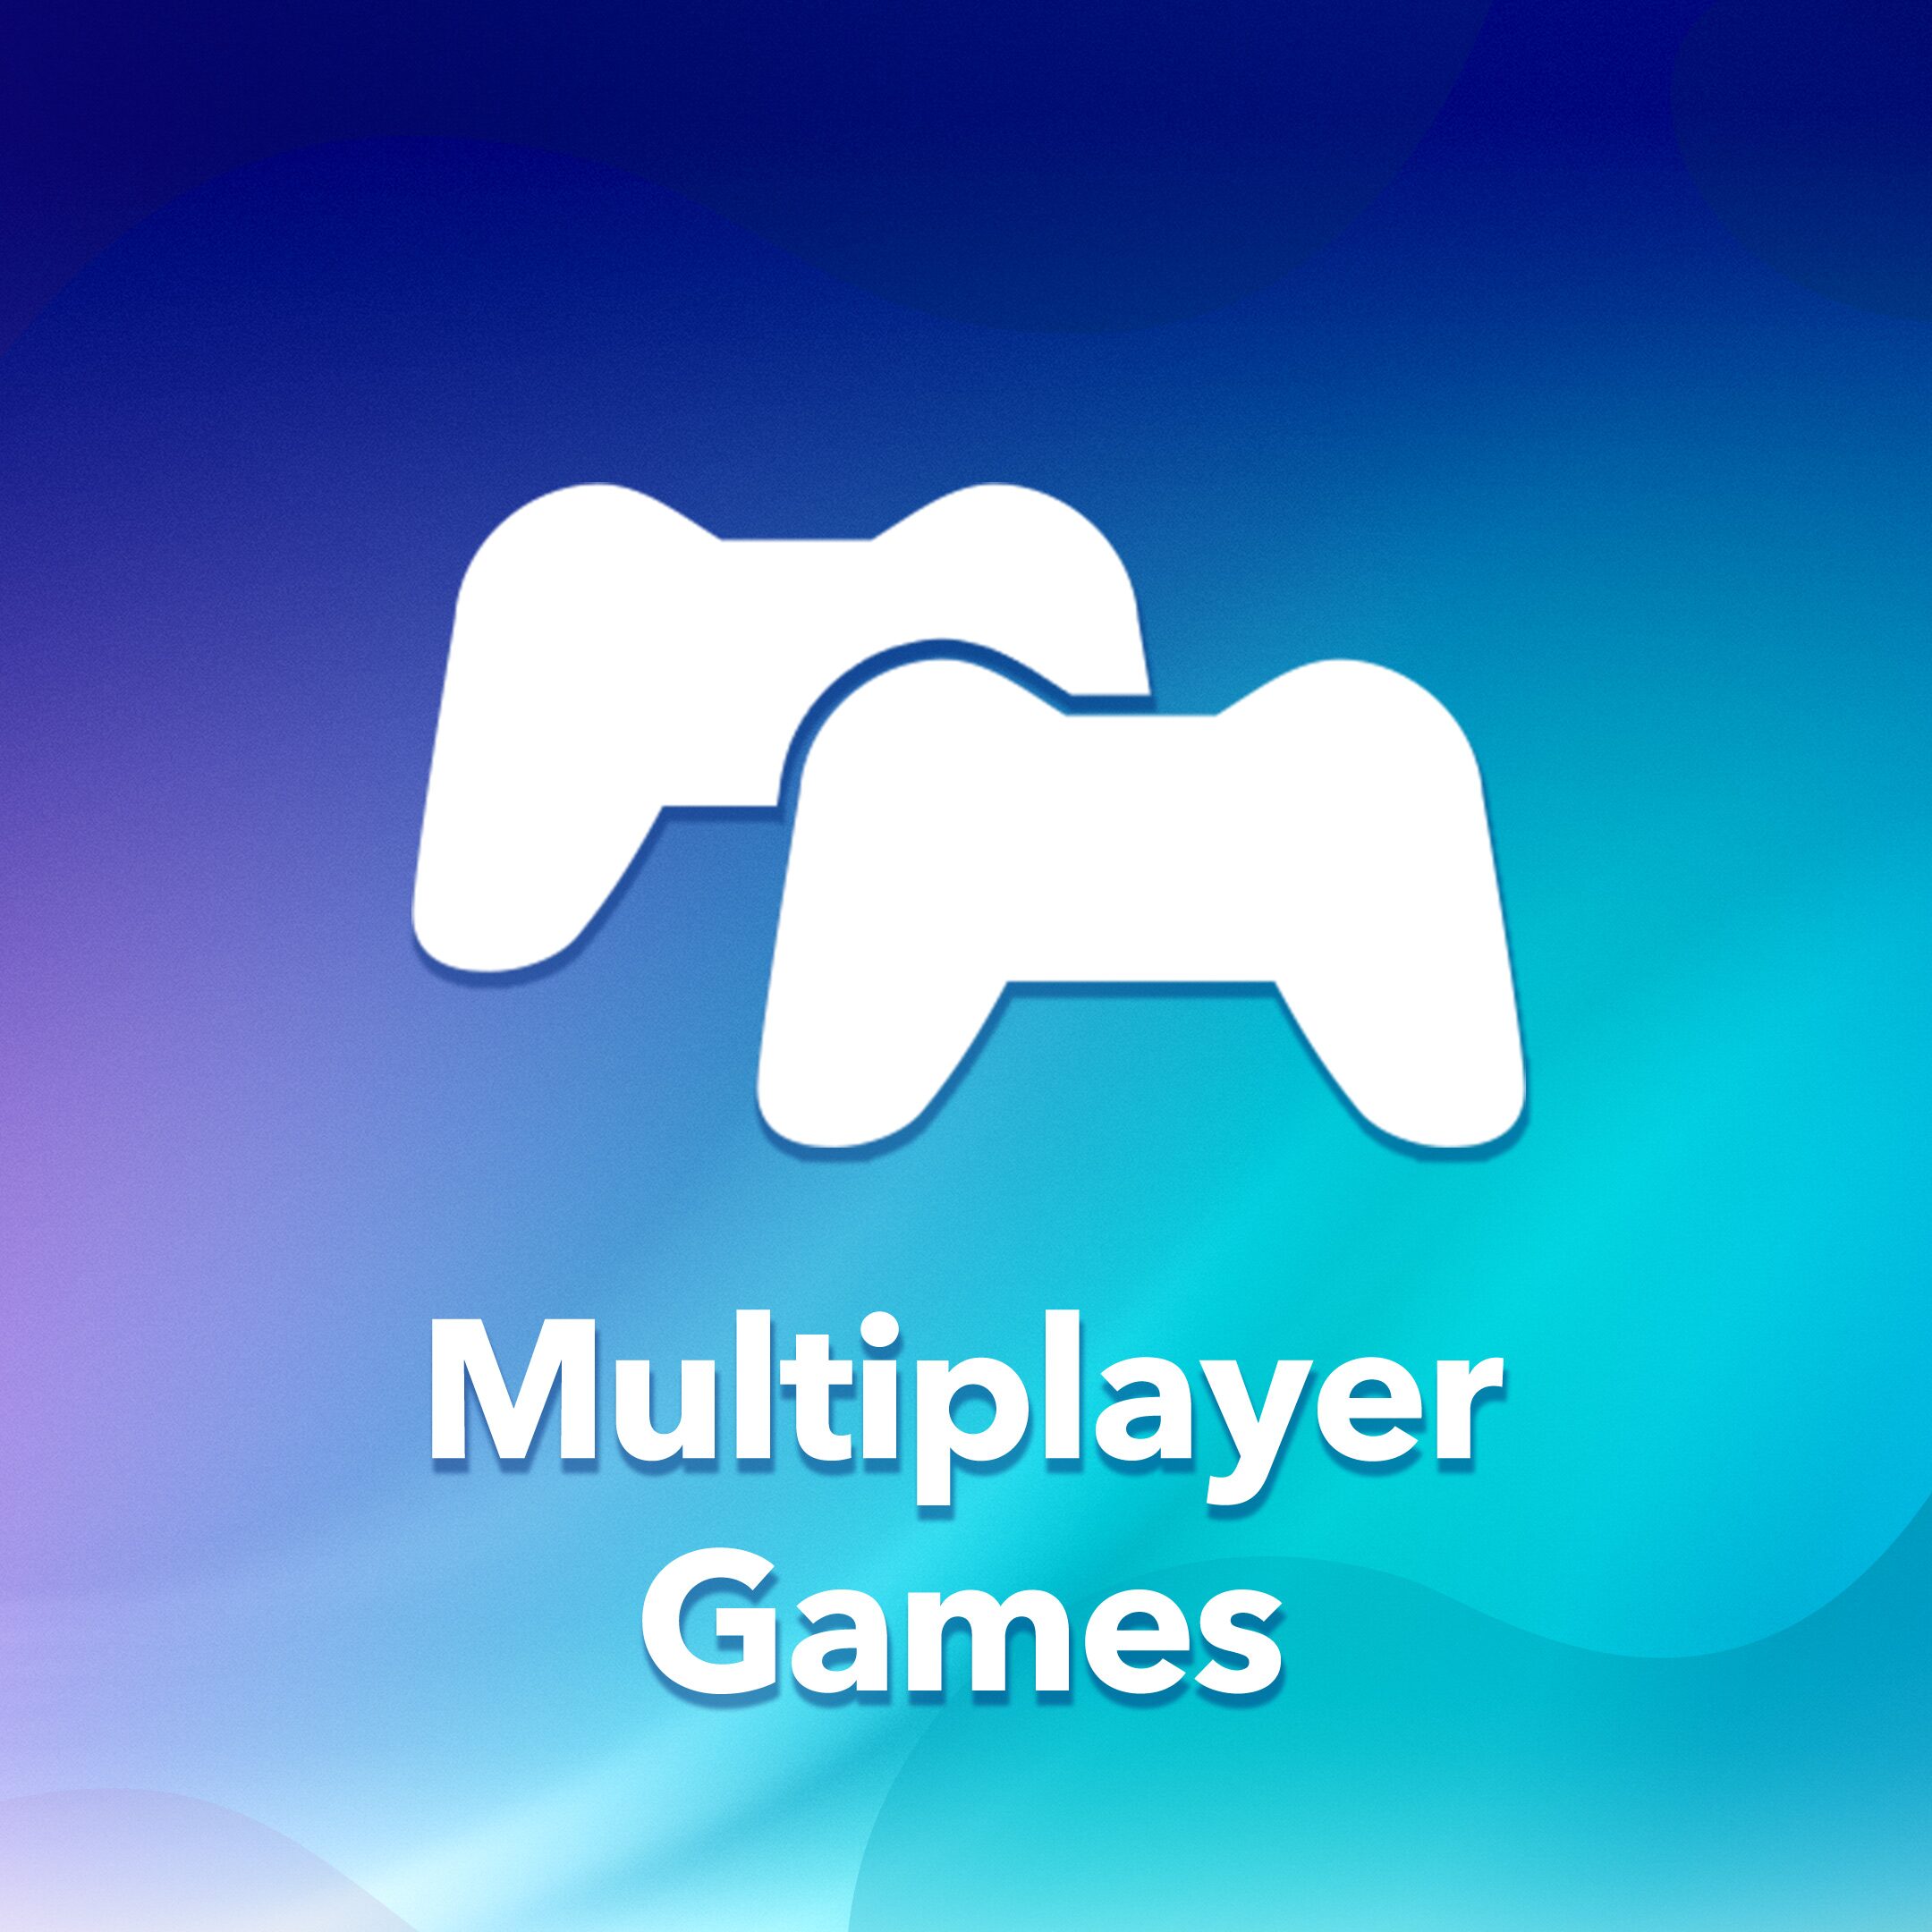 [PROMO] Days of Play 2022 - Multiplayer Games